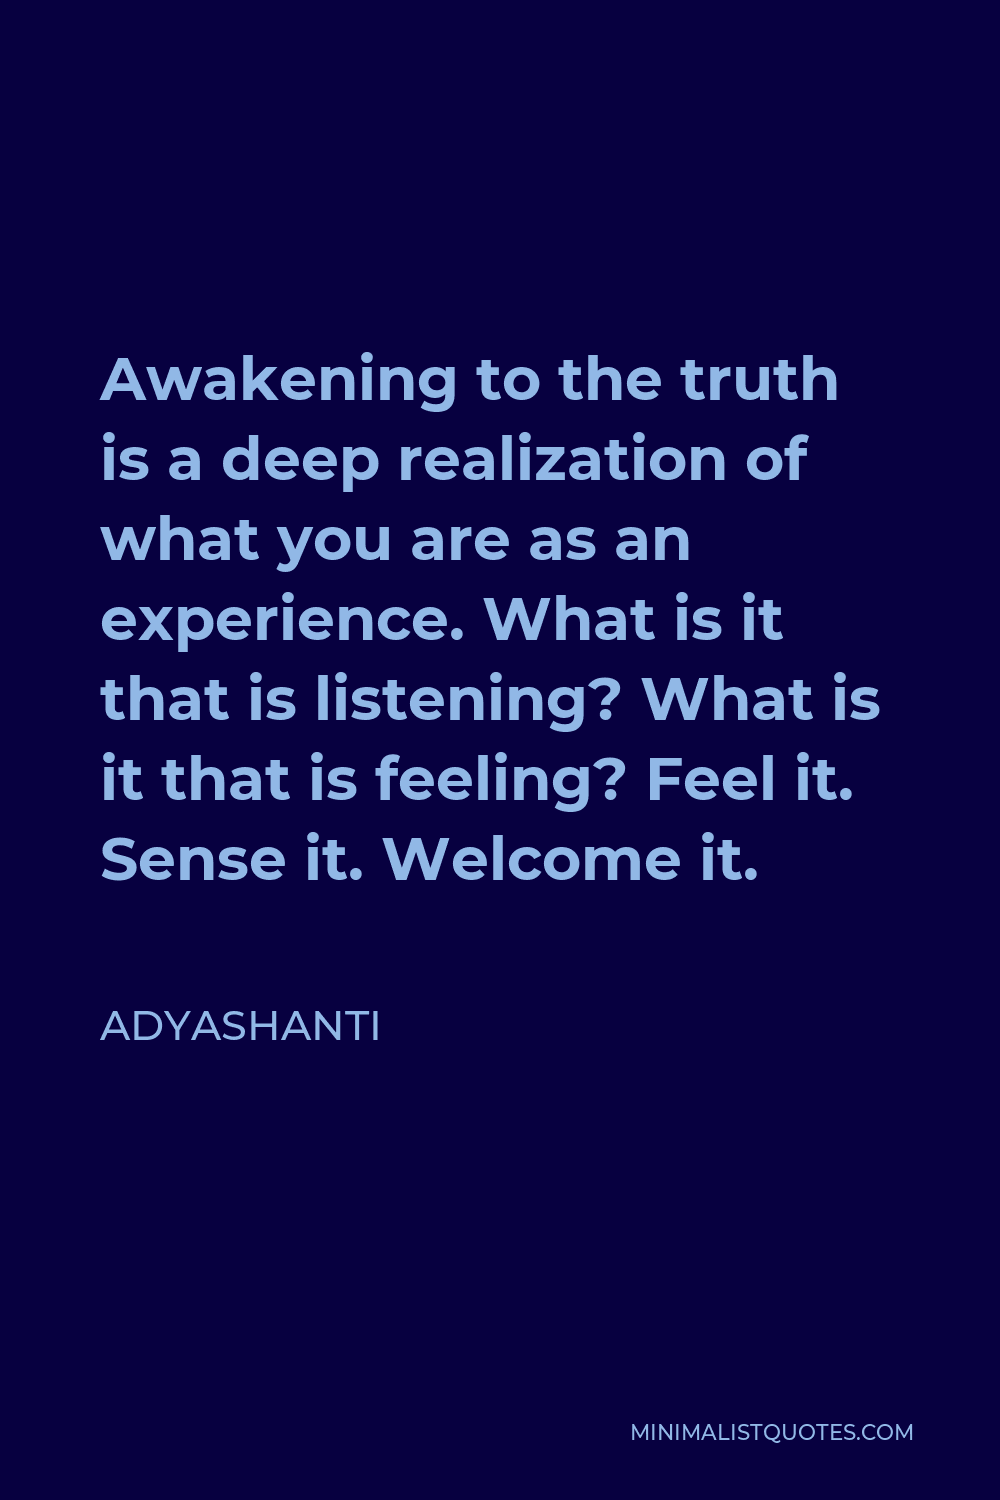 Adyashanti Quote - Awakening to the truth is a deep realization of what you are as an experience. What is it that is listening? What is it that is feeling? Feel it. Sense it. Welcome it.